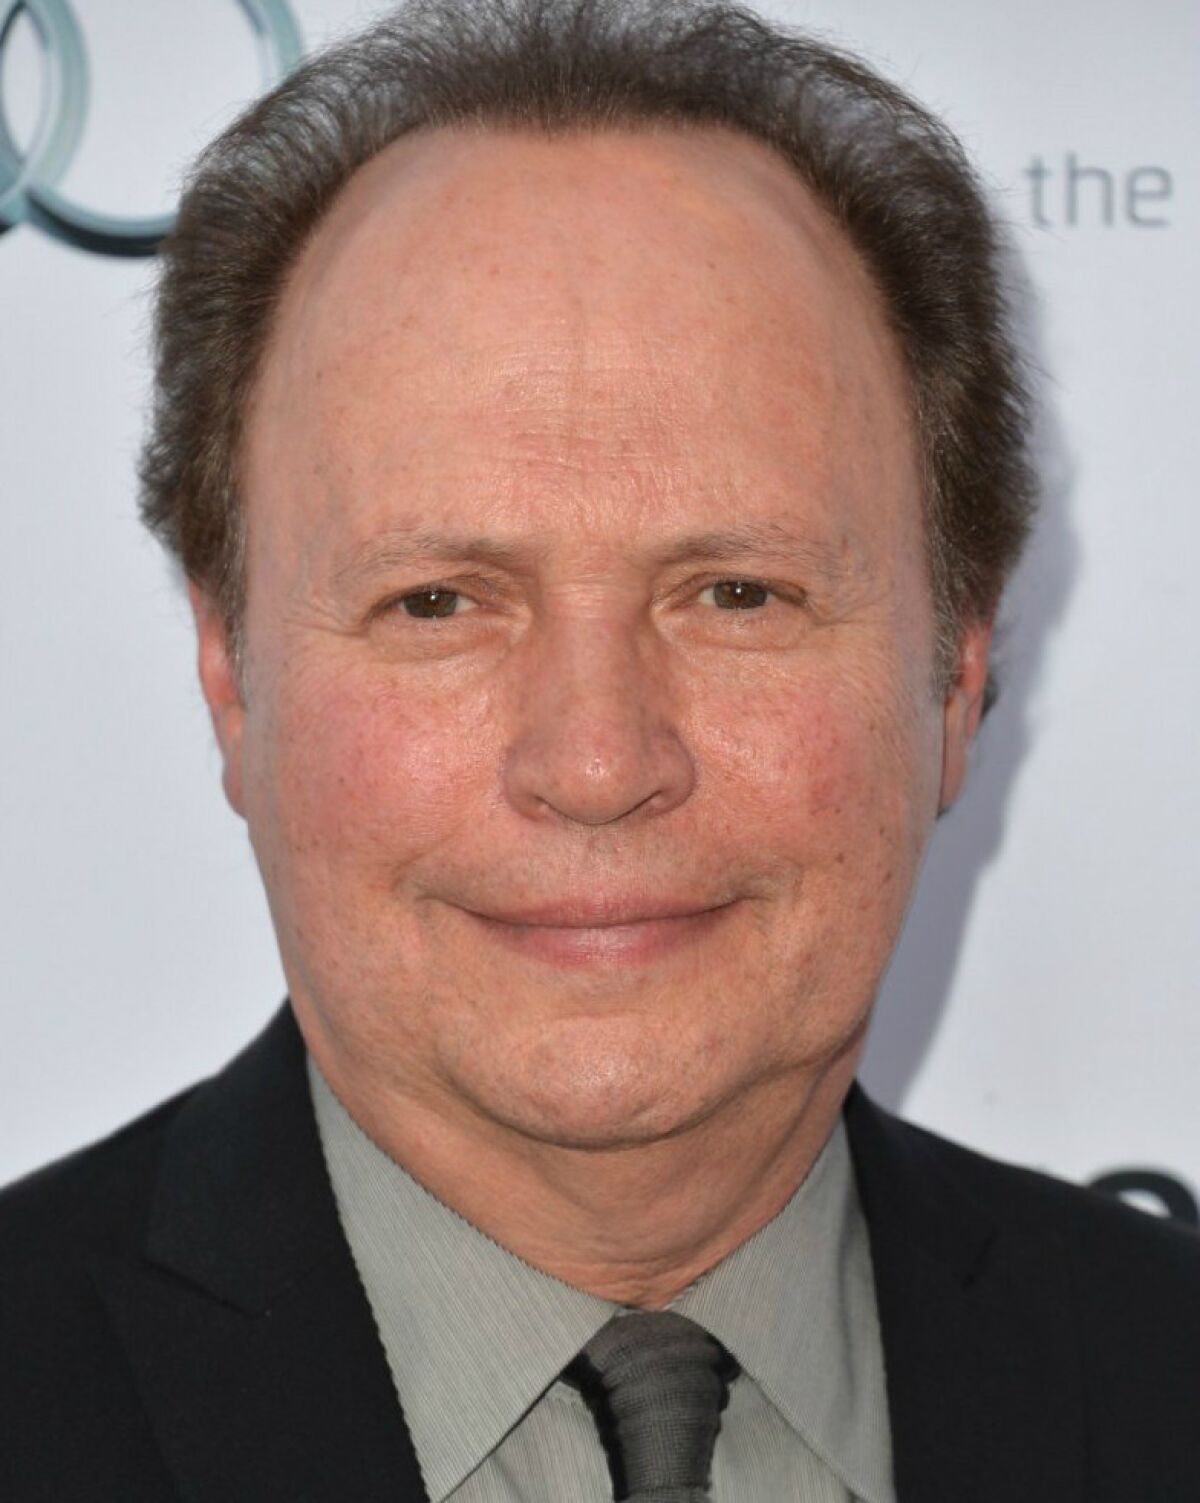 Billy Crystal will bring his one-man play "700 Sundays" back to Broadway.